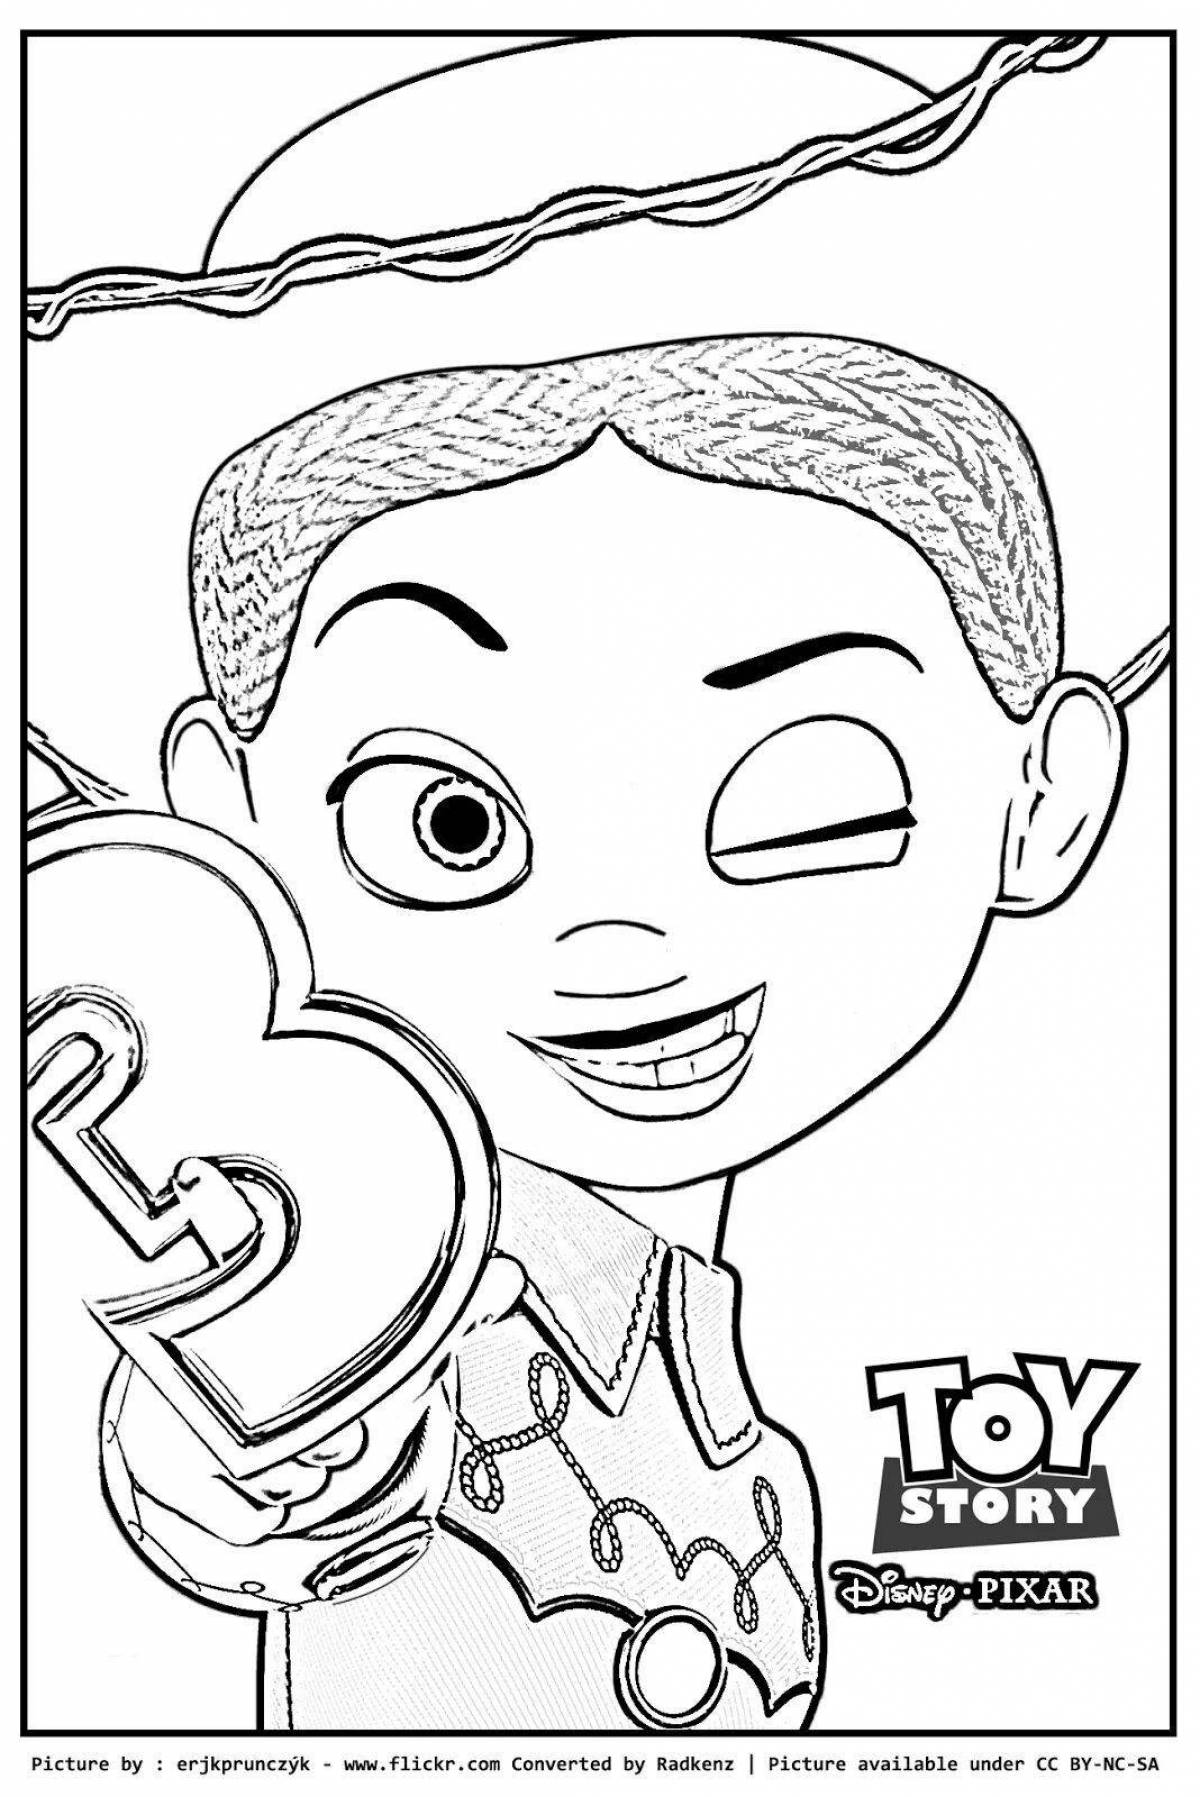 Coloring book shining jessie toy story